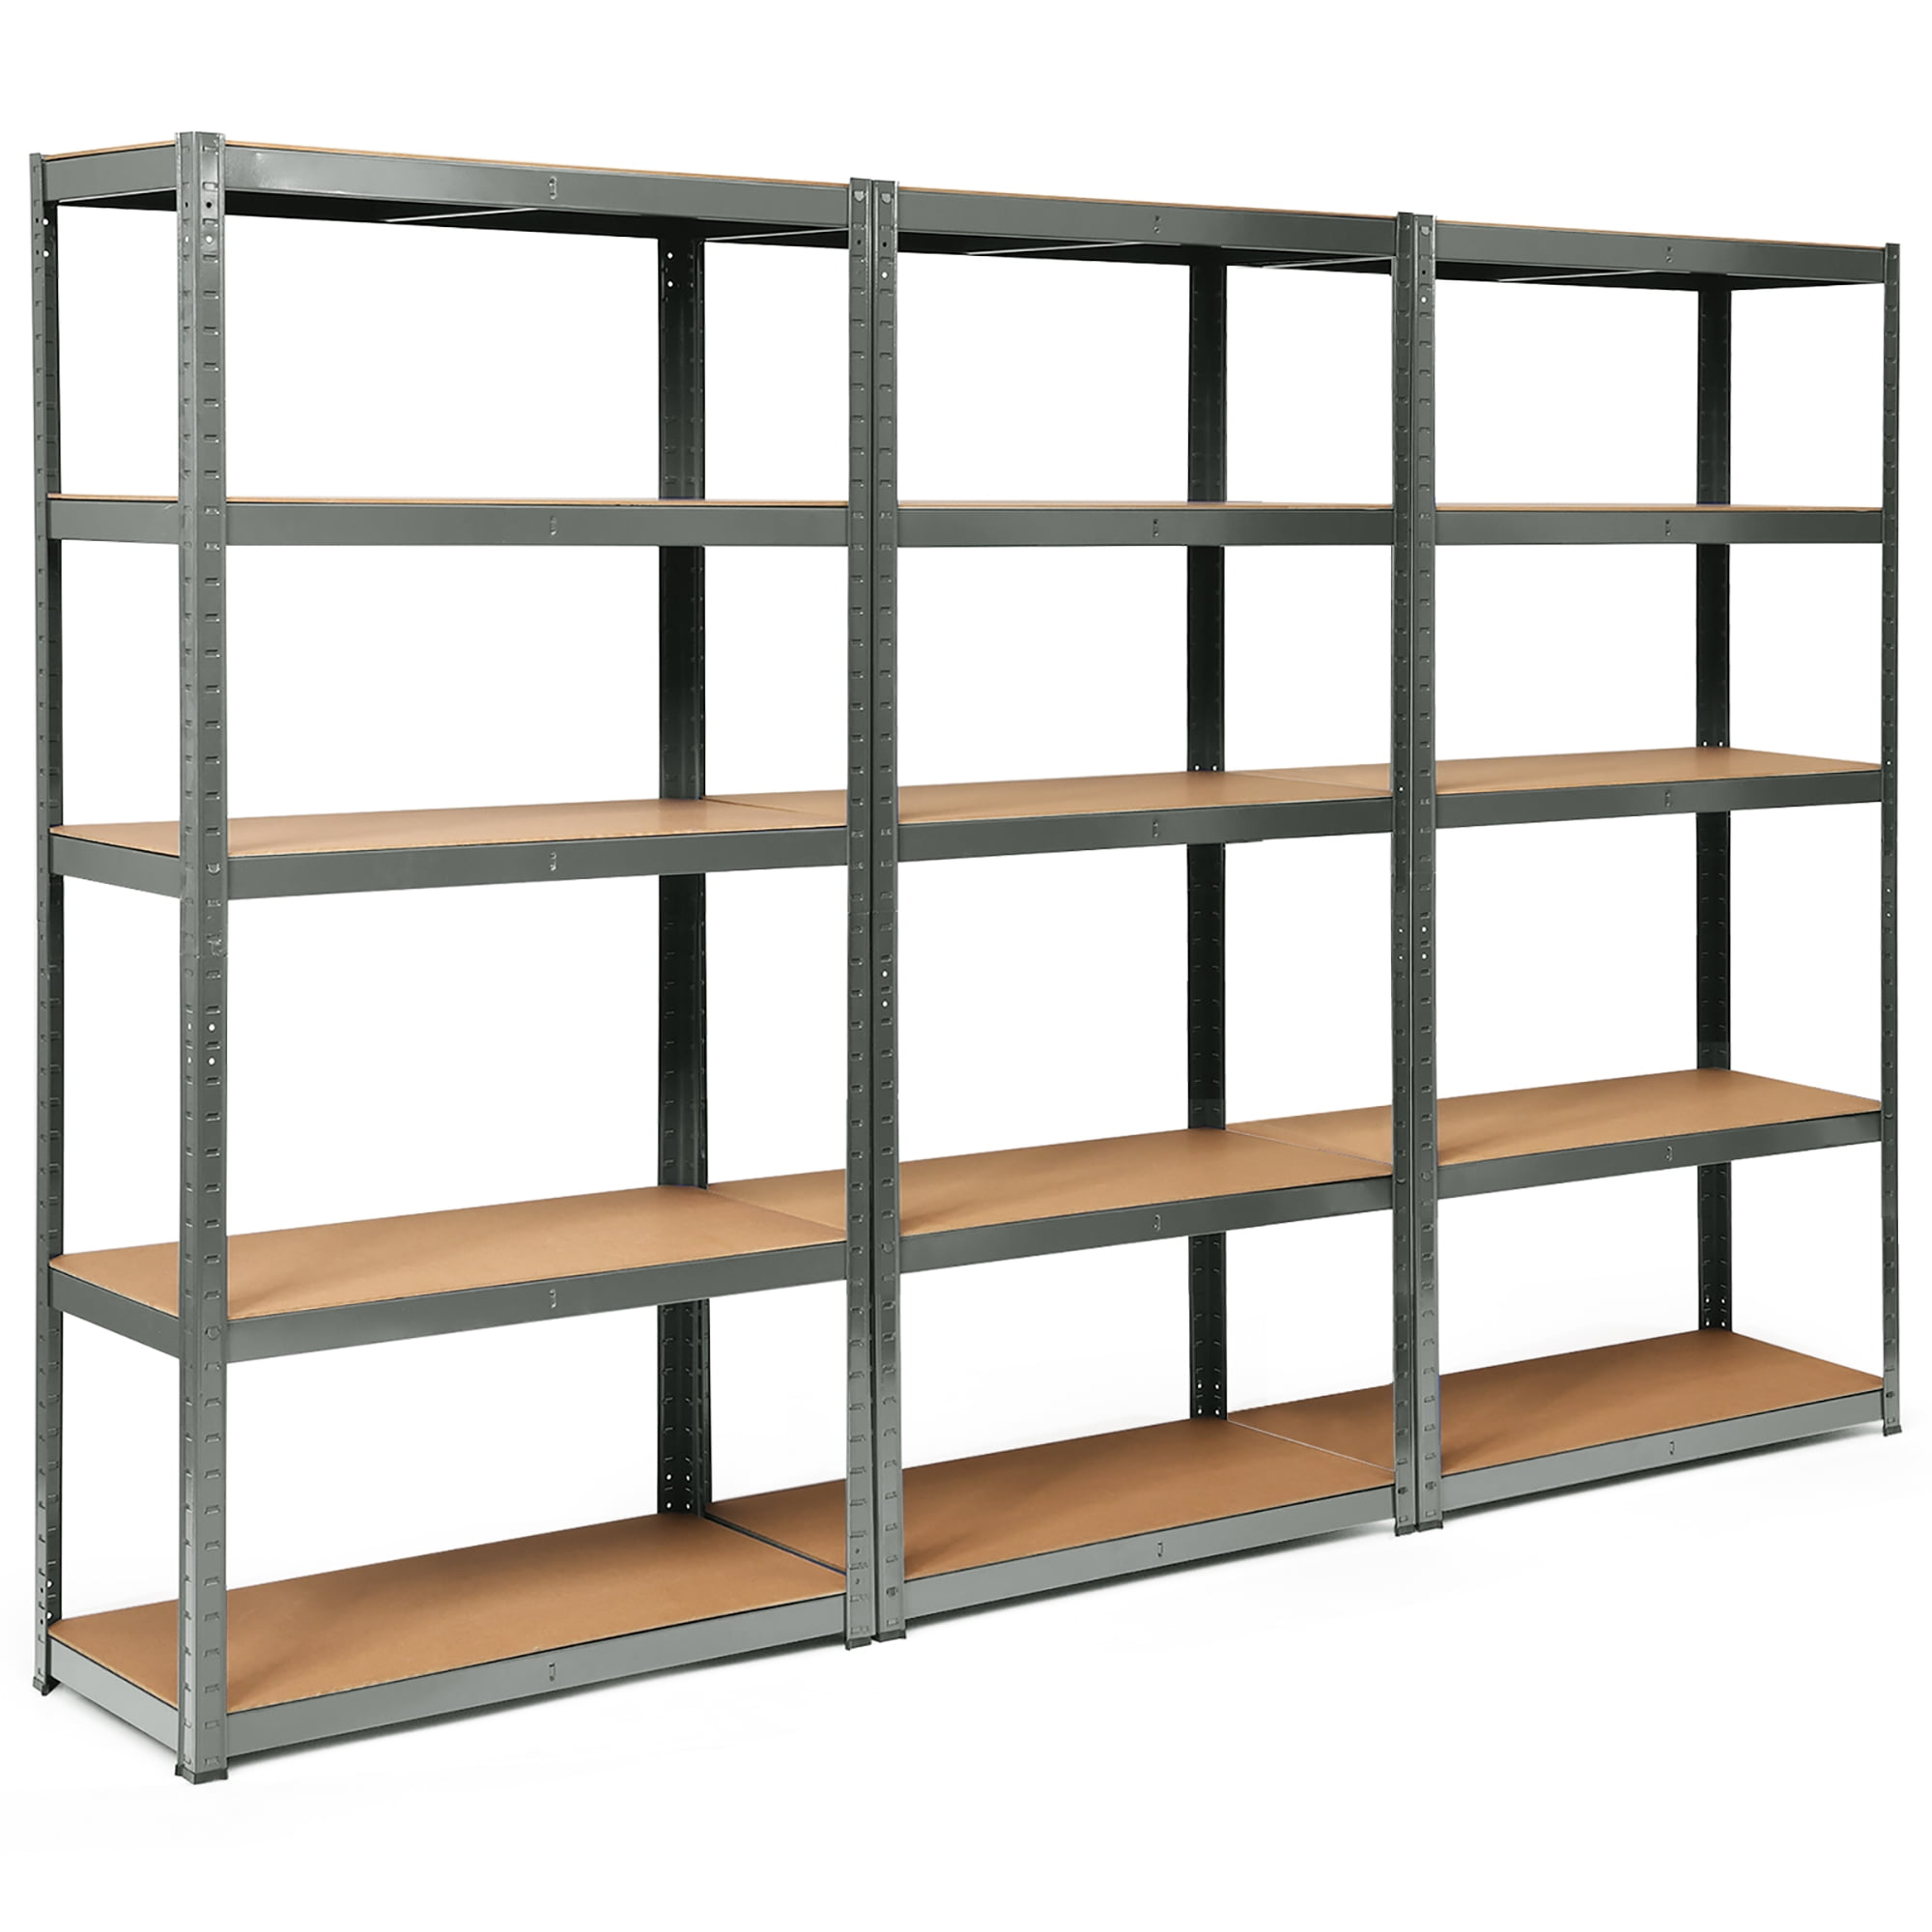 Slim Space Retractable Racks with Three Roll-out Units, Closed Dimensions  (58.5 W x 43 D x 82 or 91 H), #SMS-70-S3-1836-SS3